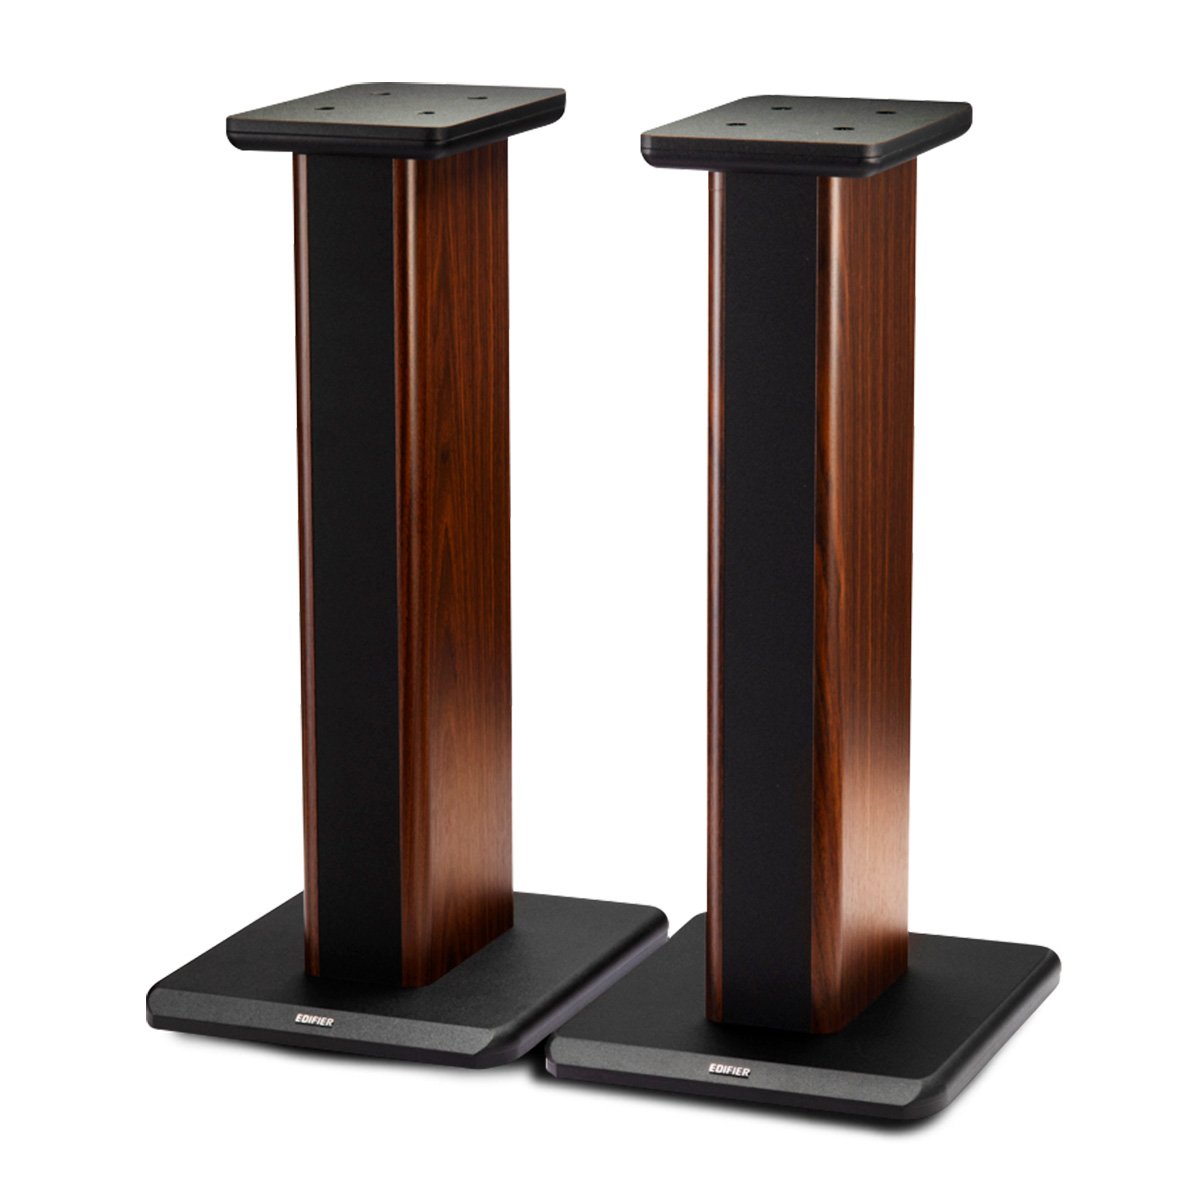 Edifier: SS02c Speaker Stands for S2000MKIII - Pair